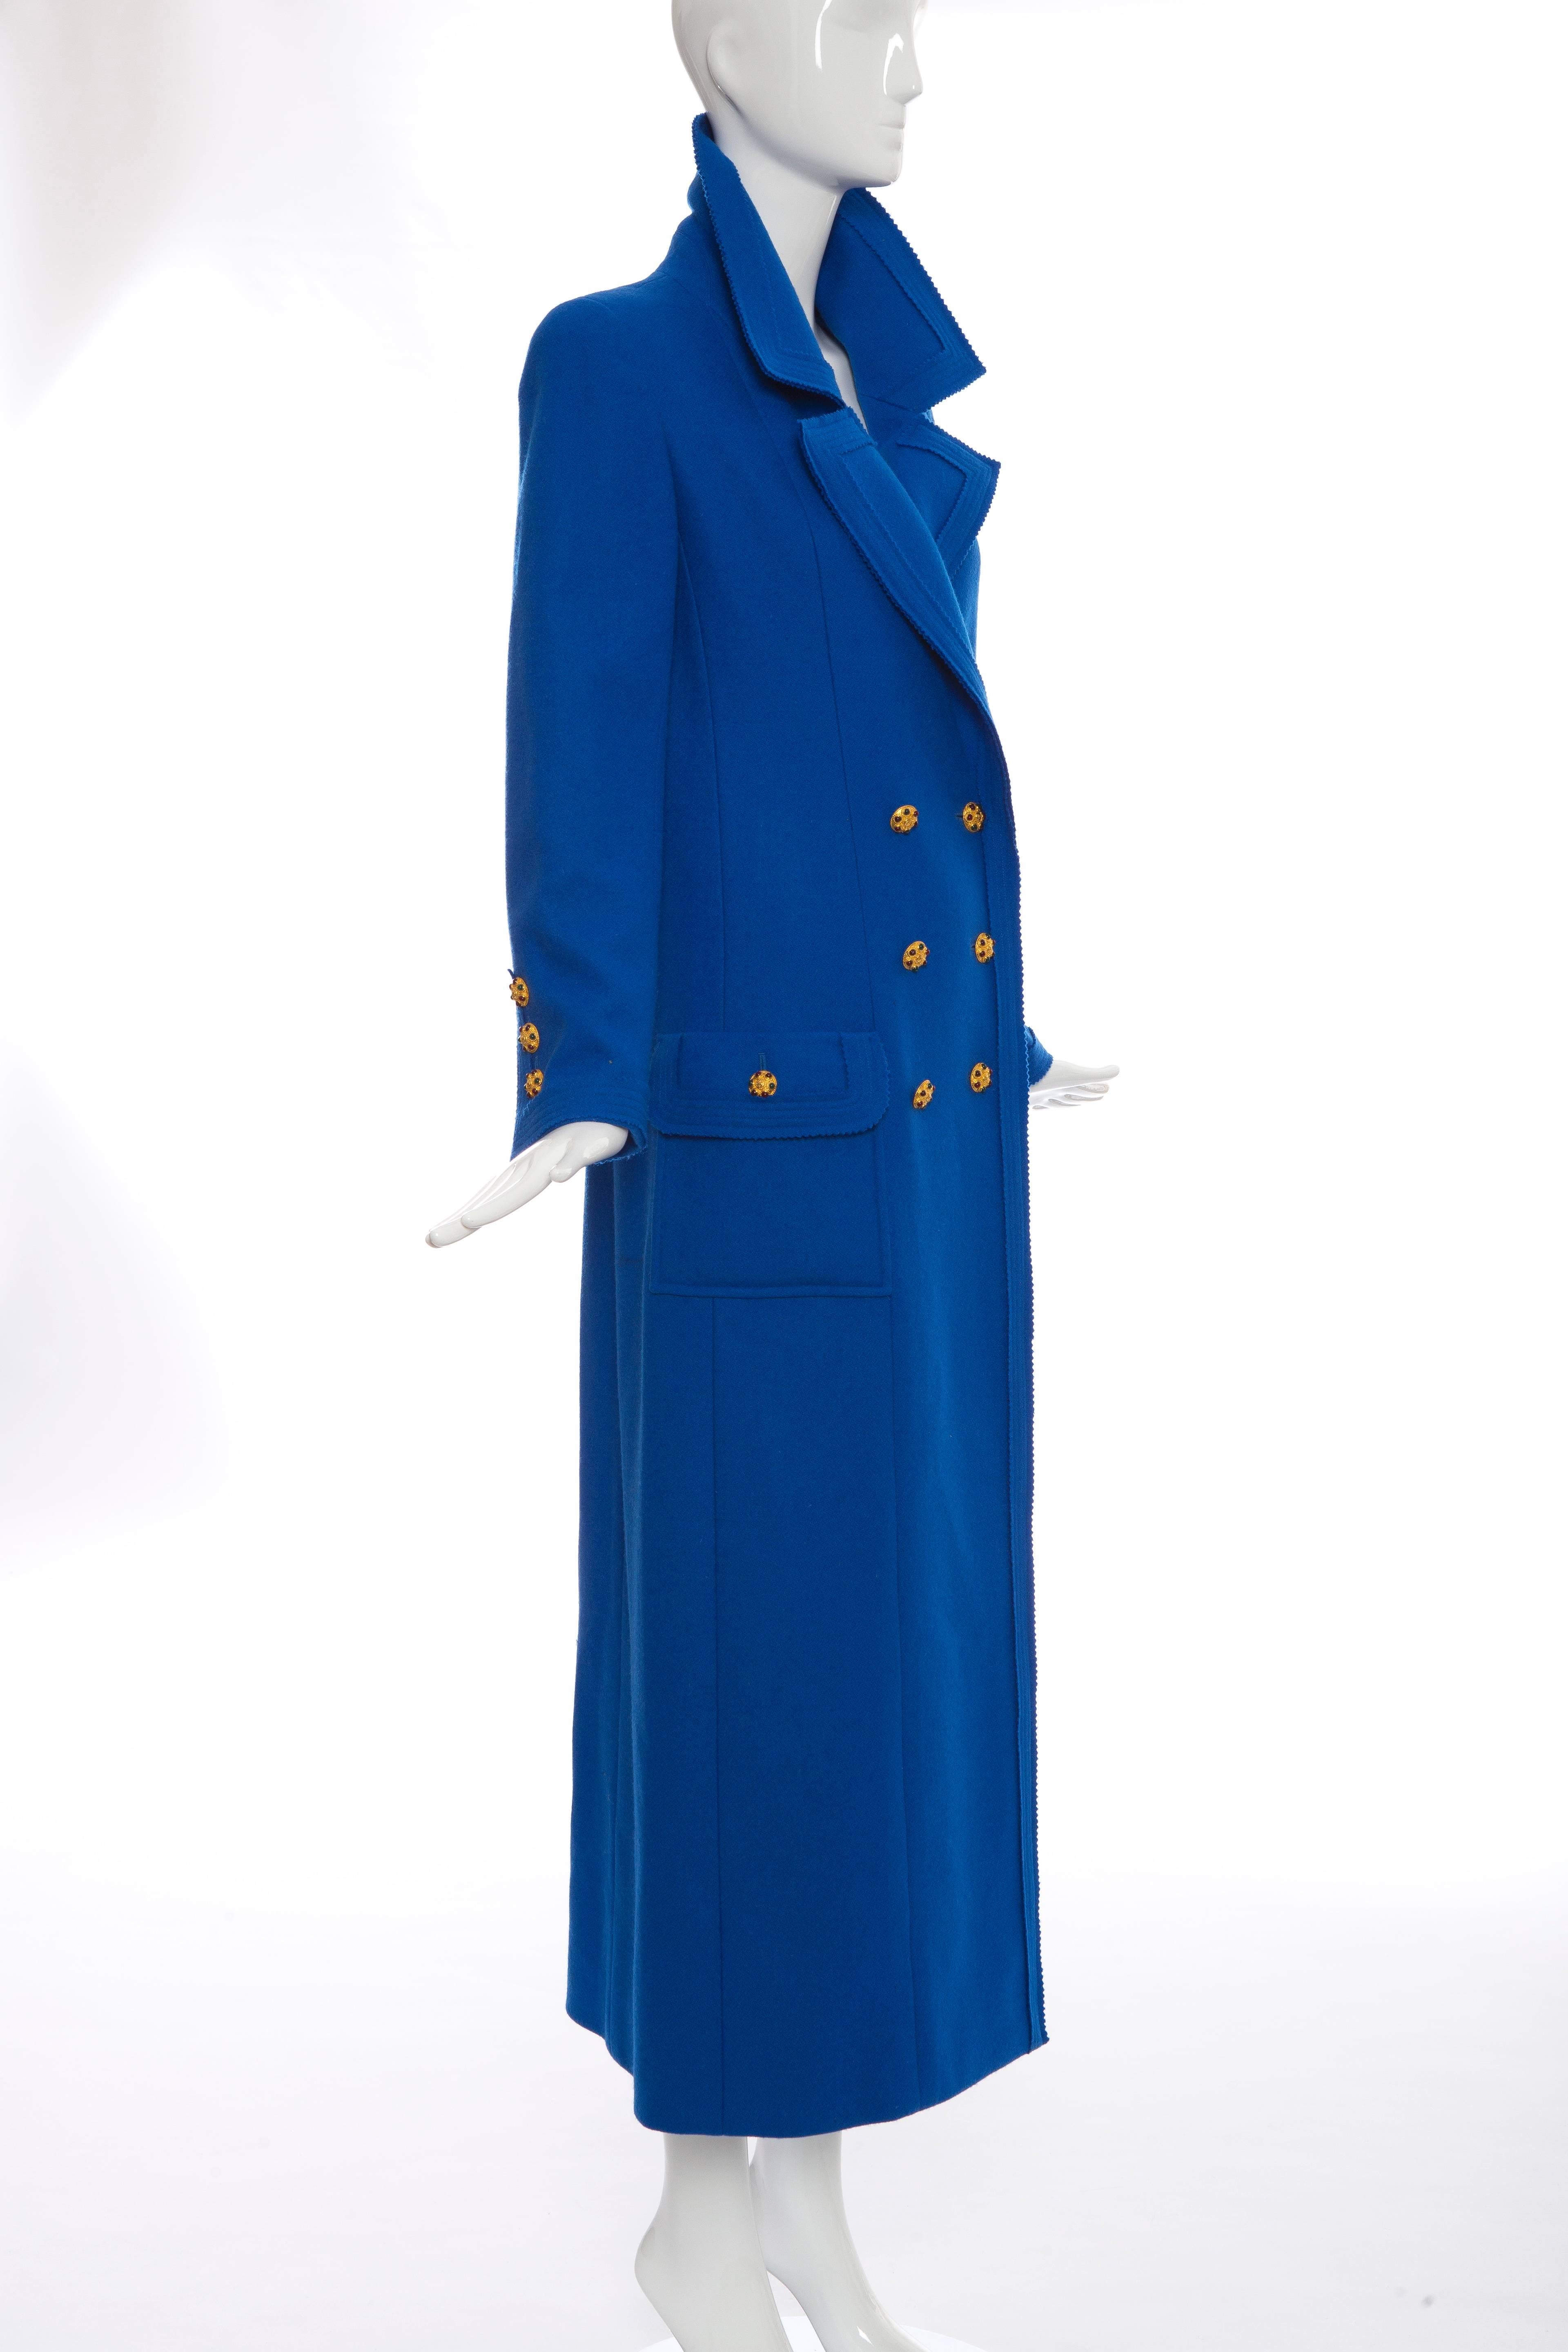 Chanel Royal Blue Wool Double - Breasted Coat Maison Gripoix Buttons, Fall 1996 1